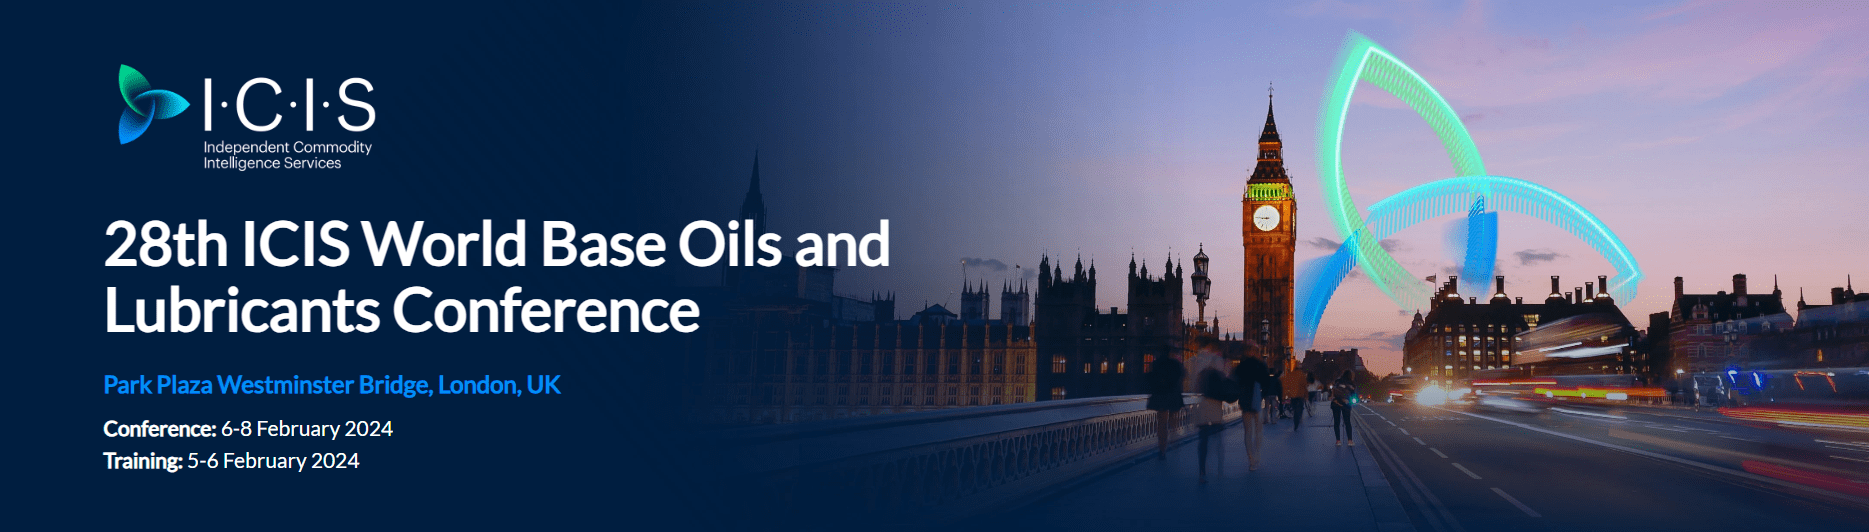 KRAHN UK attends the 28th ICIS World Base Oils conference